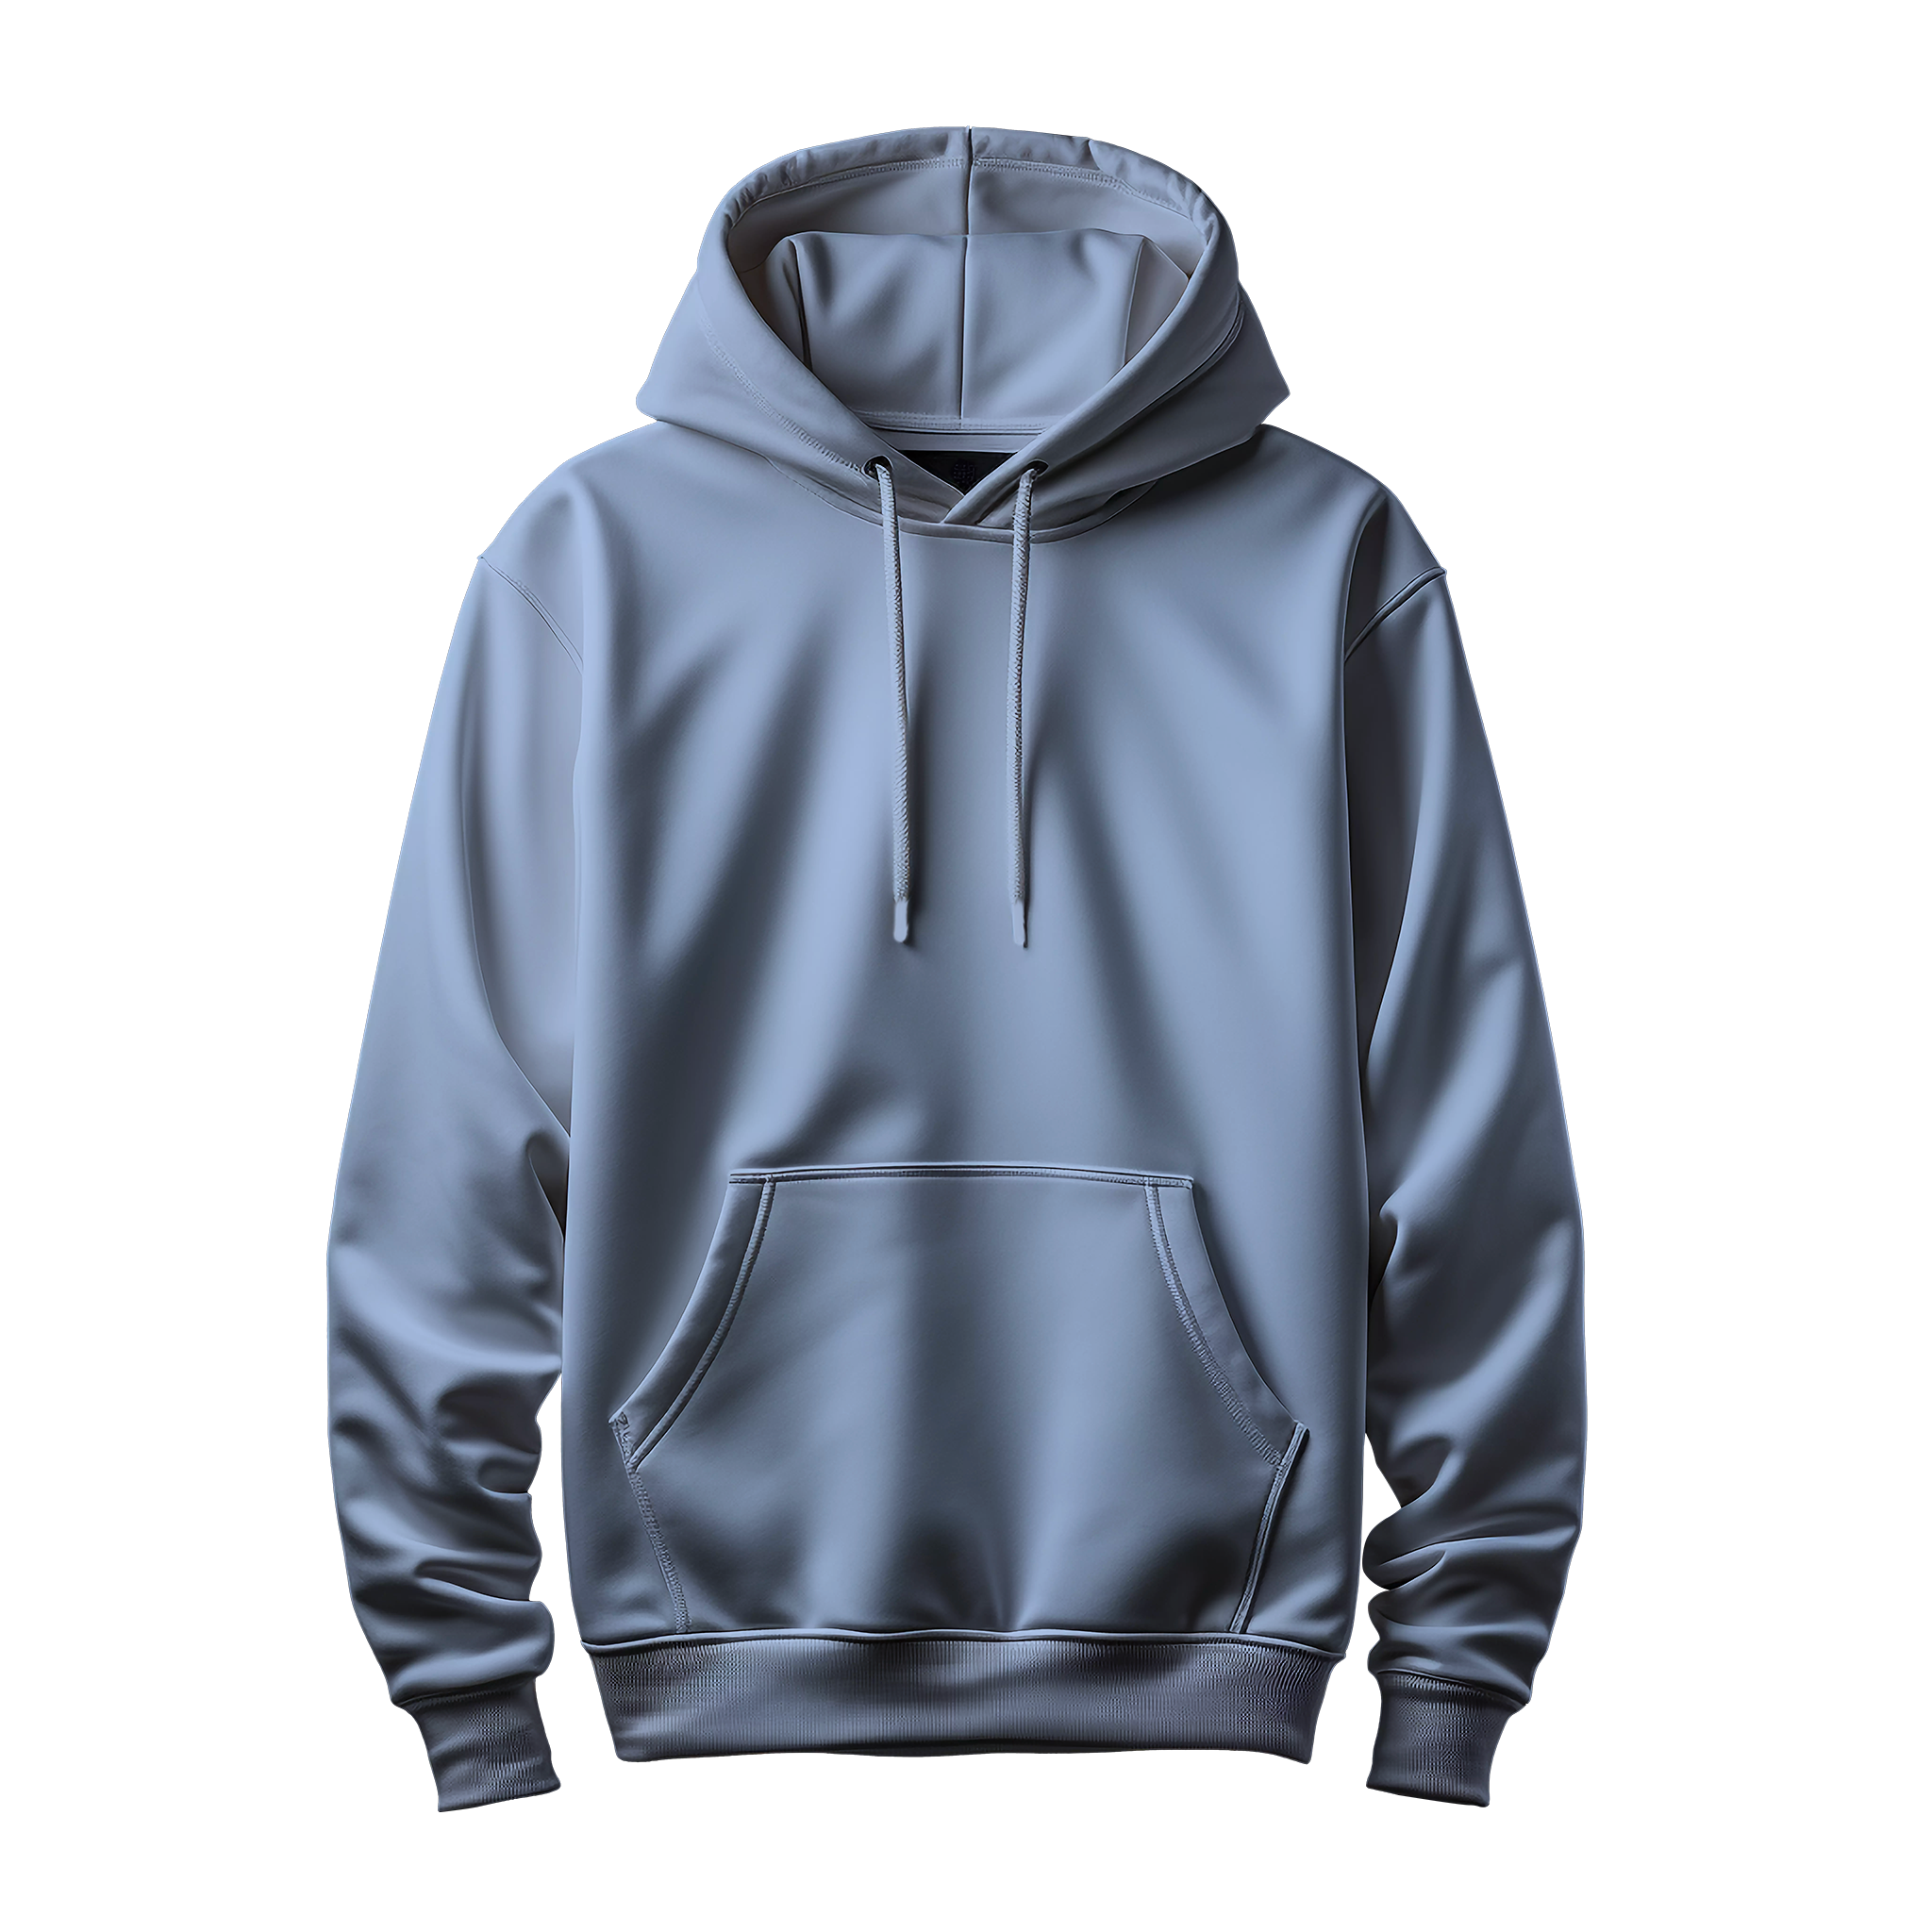 Personalized date+initial hoodie